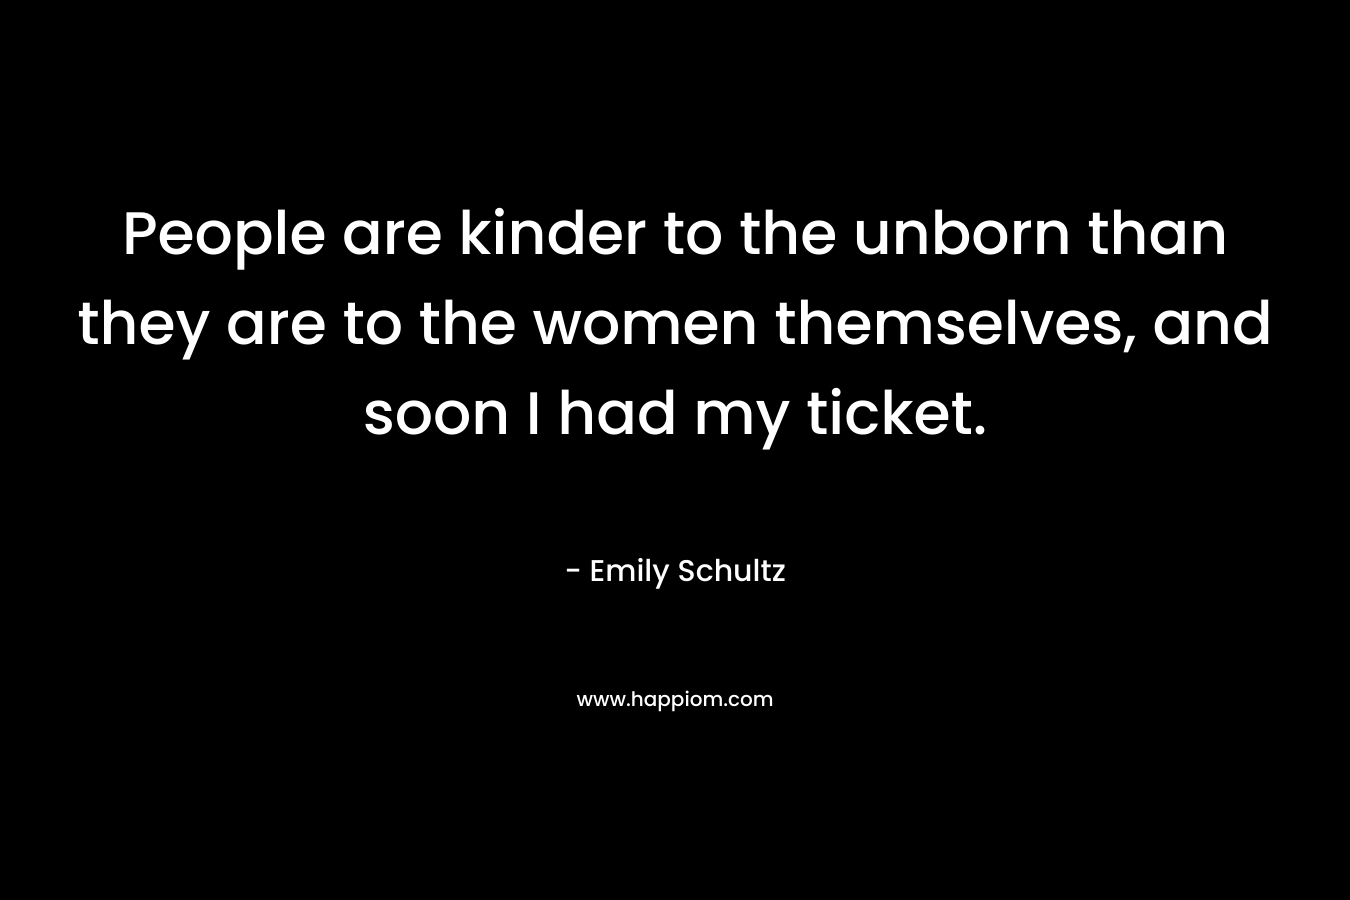 People are kinder to the unborn than they are to the women themselves, and soon I had my ticket.